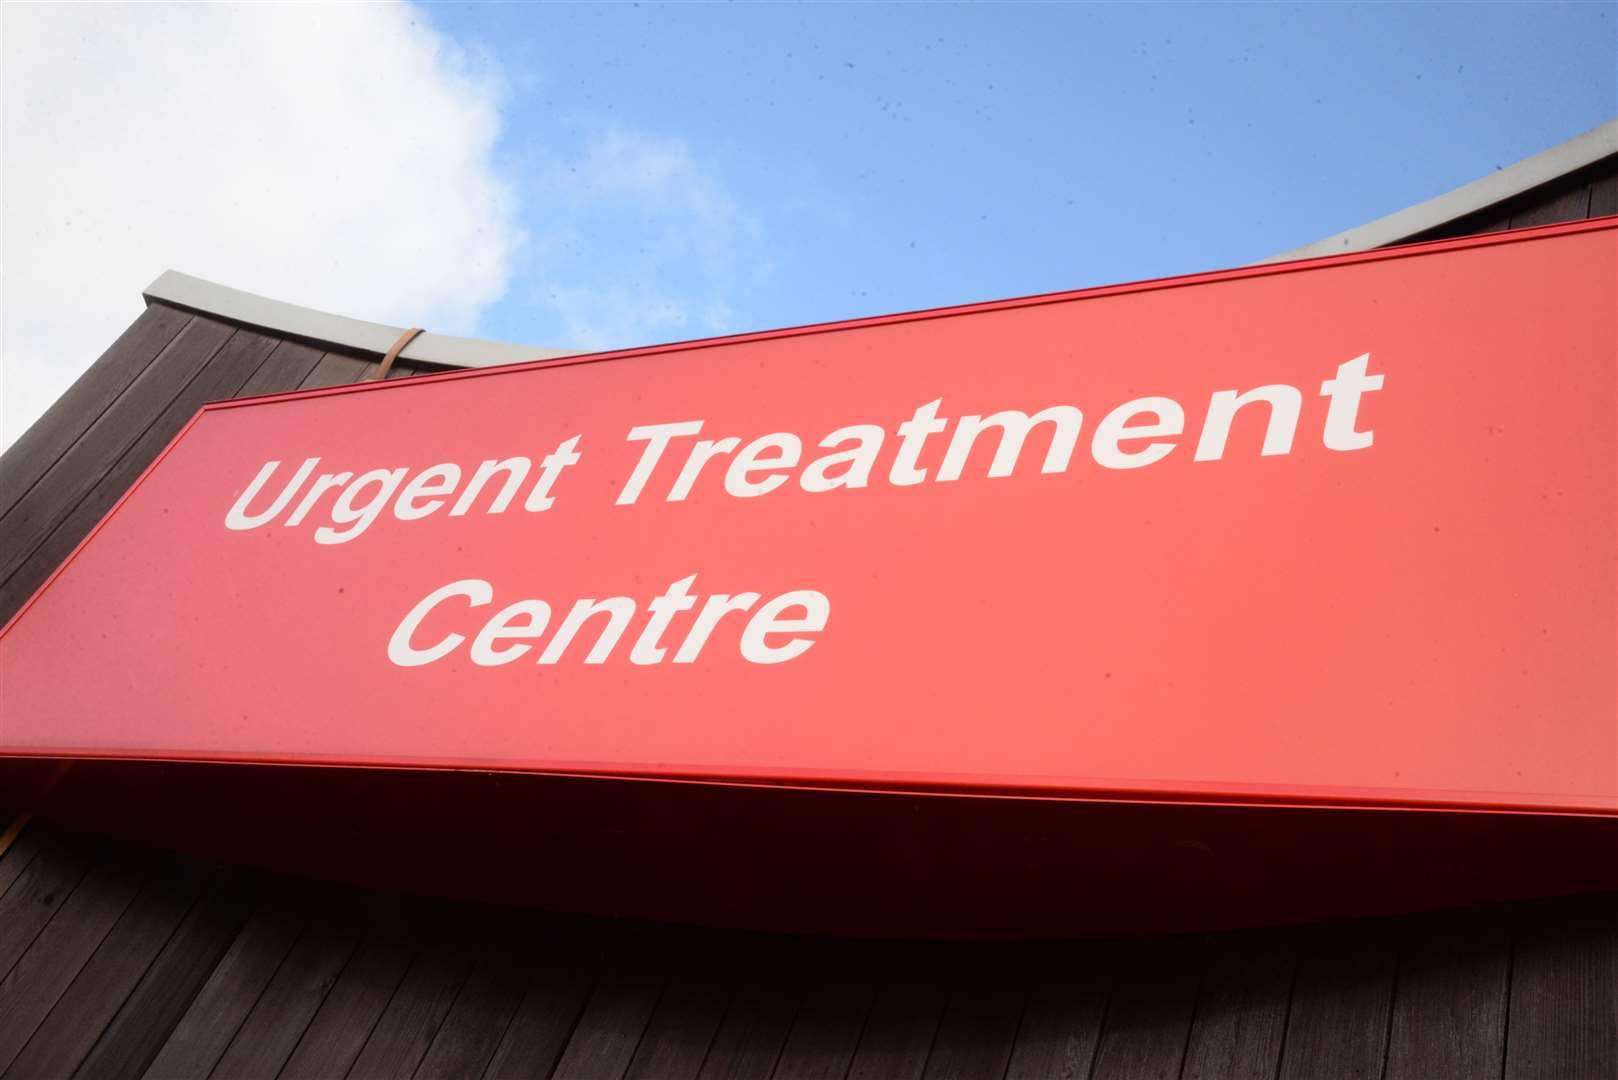 The Urgent Treatment Centre at Medway Maritime Hospital